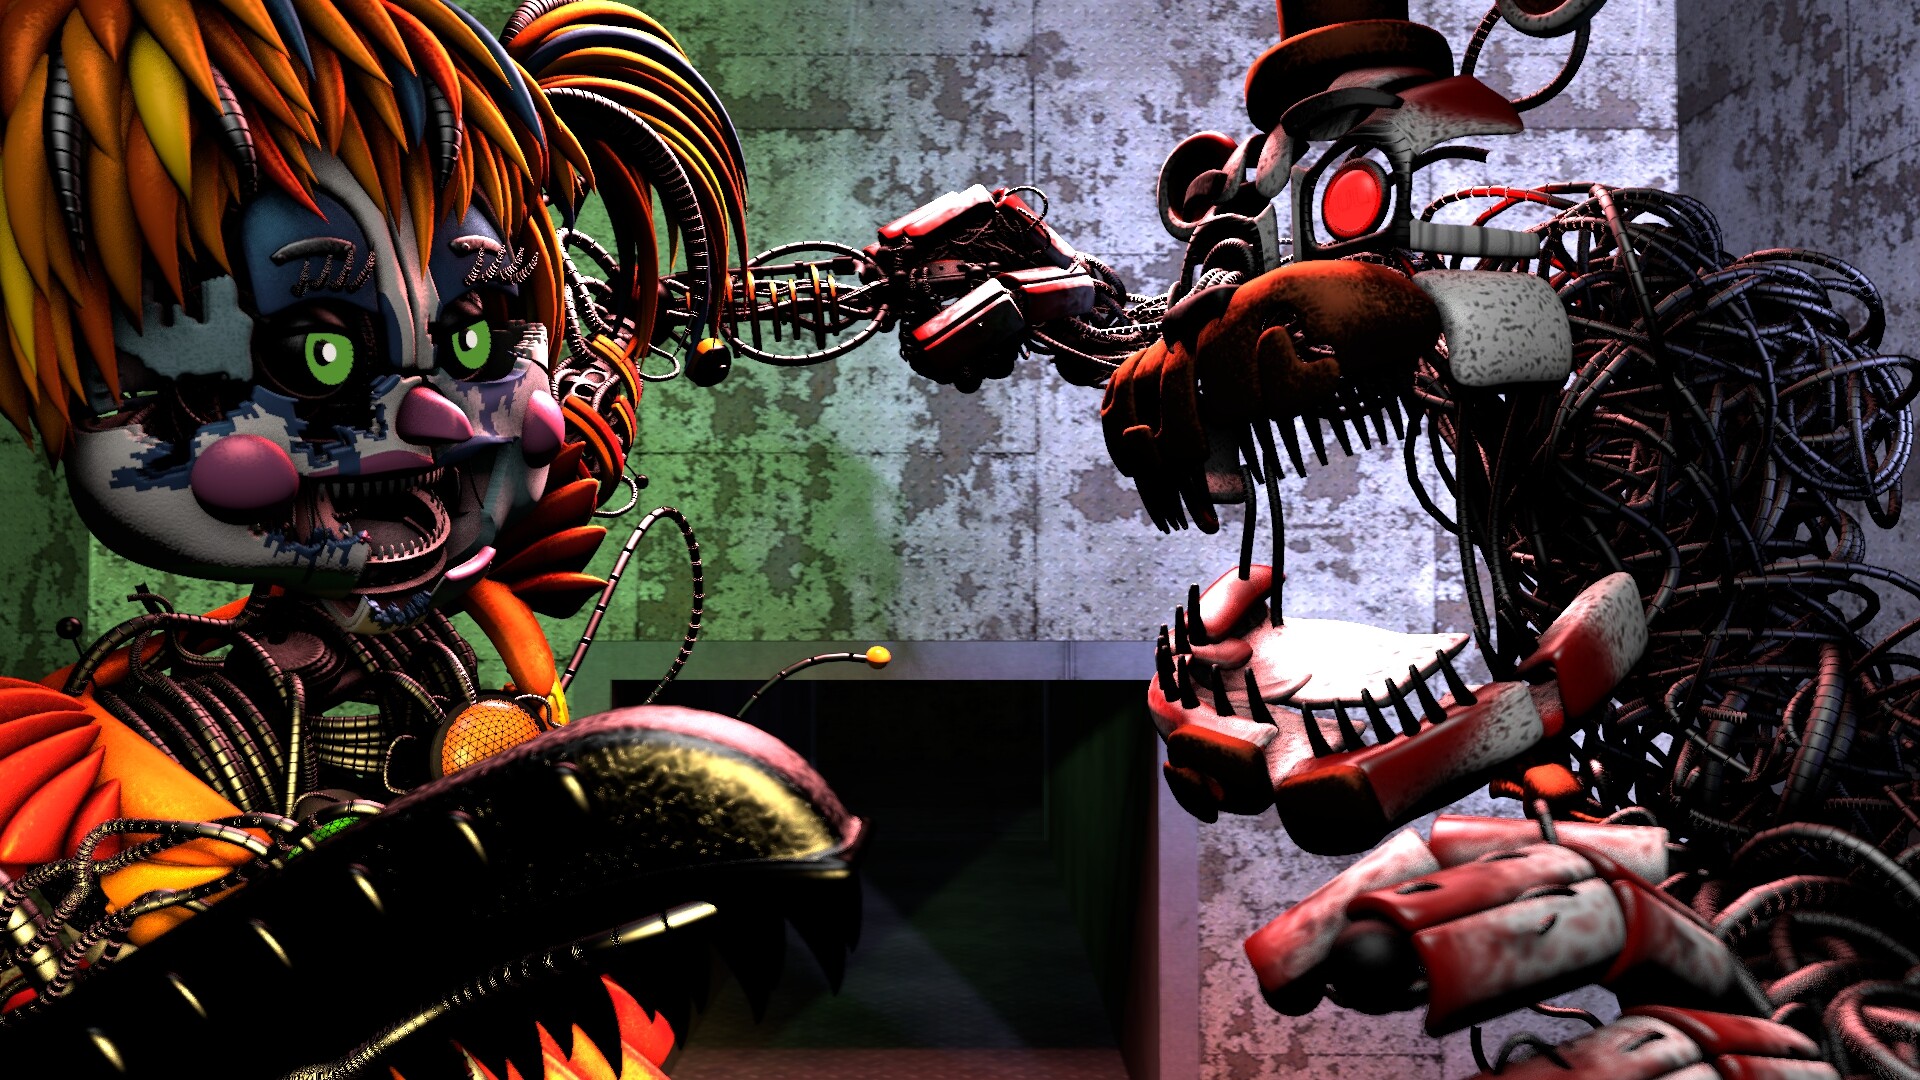 How will Springtrap, Molten Freddy and Ennard work in UCN Blank